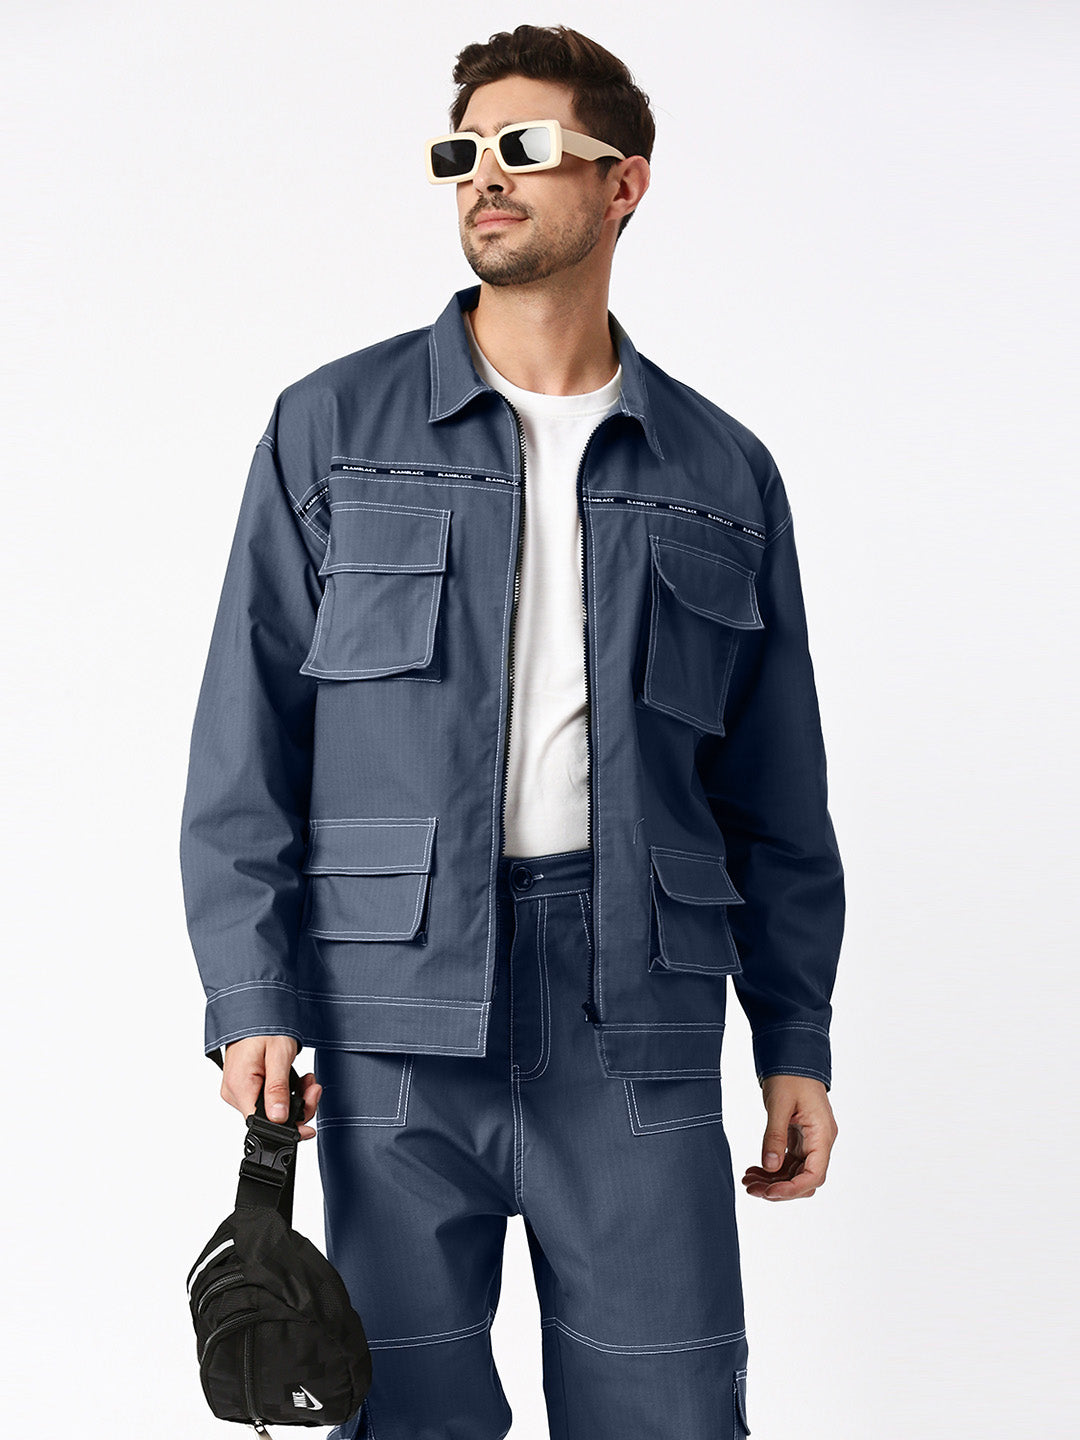 BLAMBLACK Men's Cargo Style Jacket With Pant Navy Blue Color Co-Ord Set